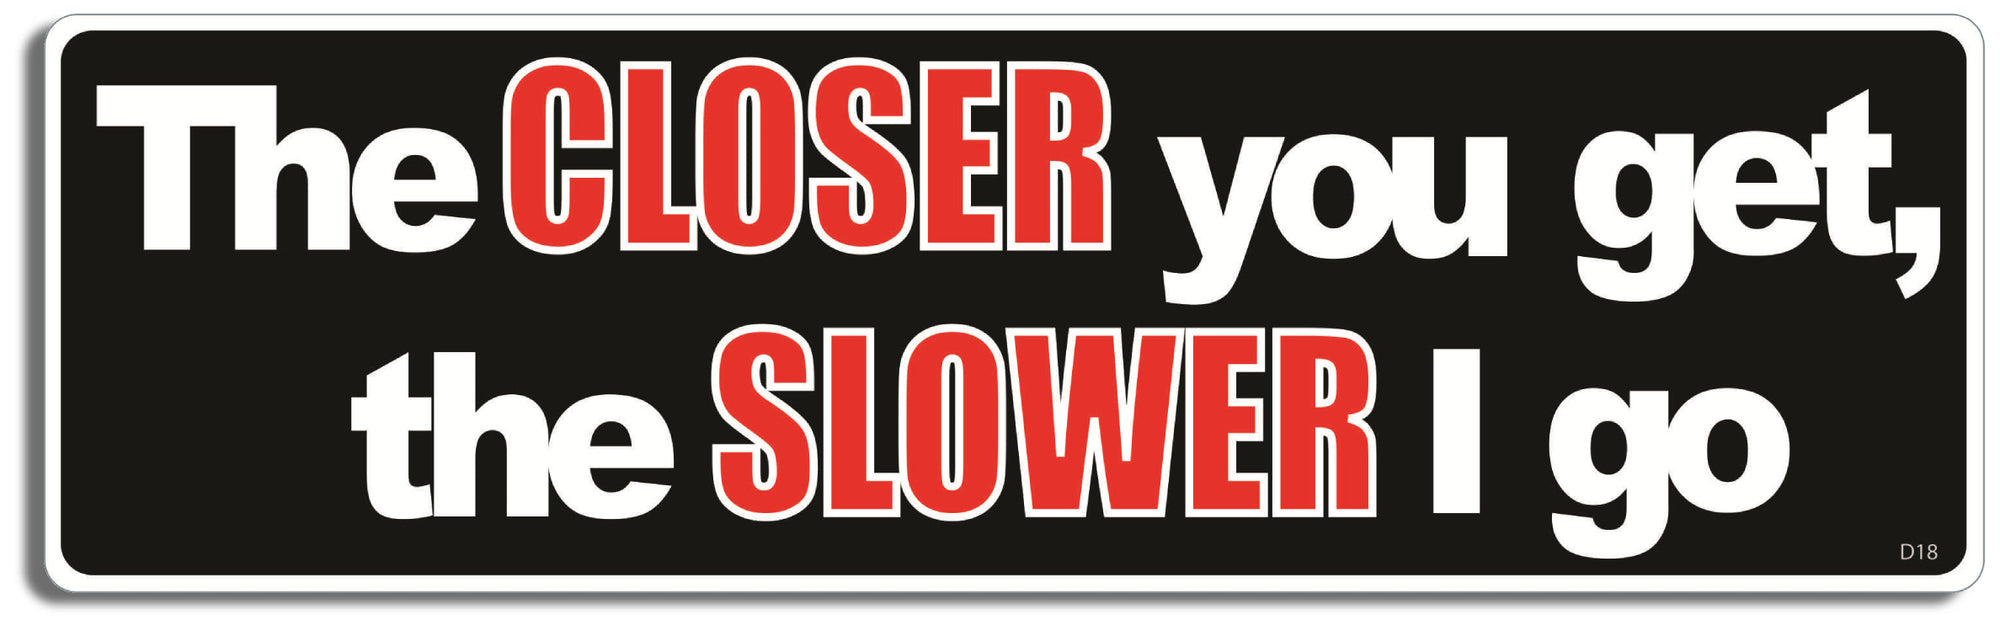 Extra Large Sticker-:  The closer you get, the slower I go - 4" x 15" -  Decal XLfunny Bumper Sticker Car Magnet The closer you get, the slower I go-  Decal for carsDriving, Funny